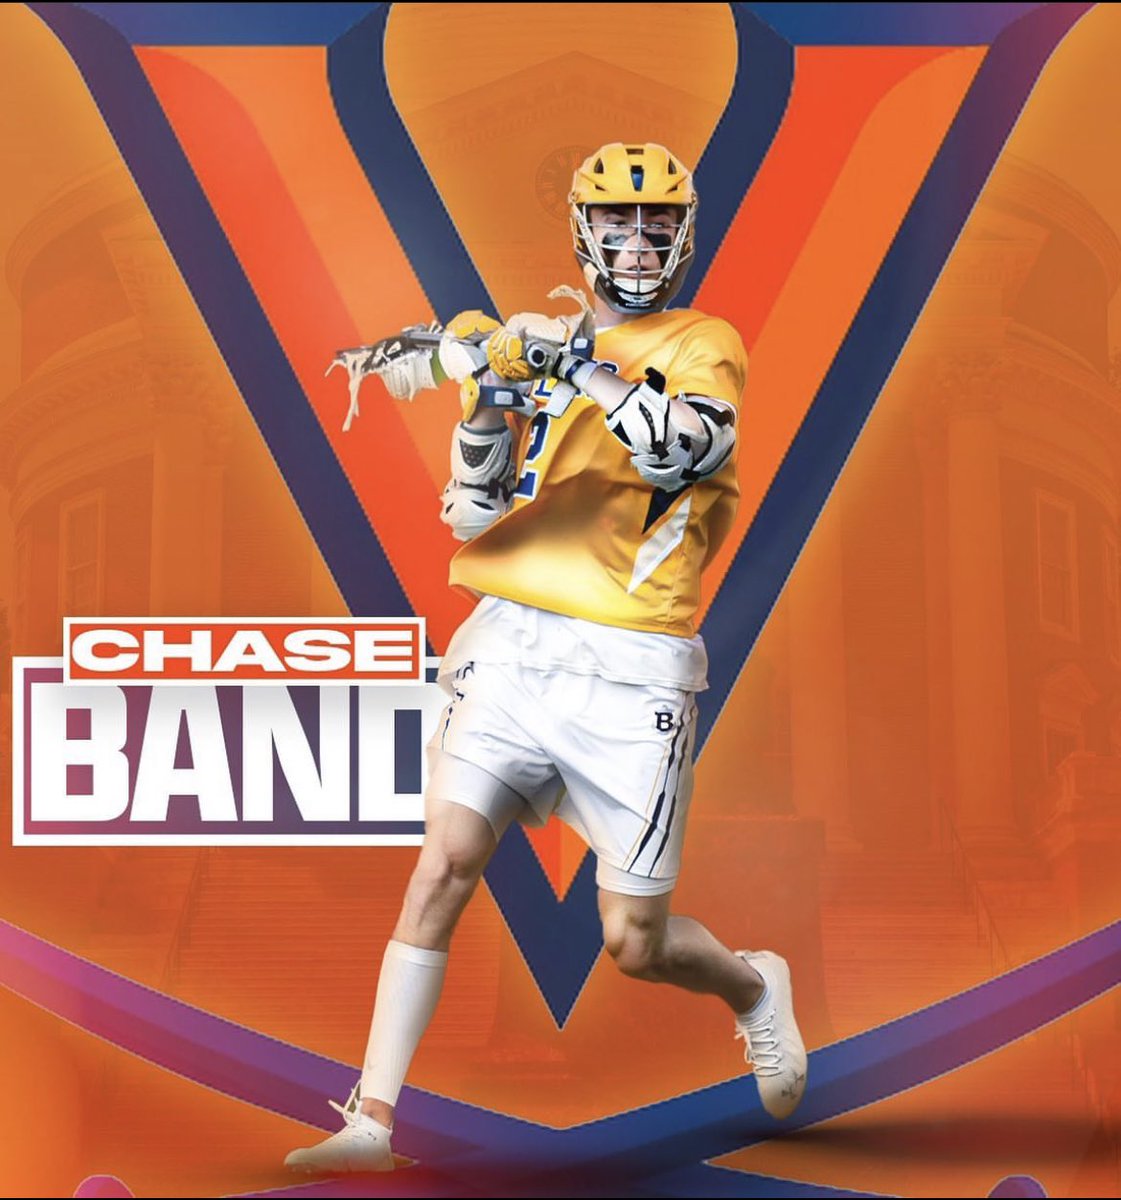 A 50-plus goal scorer this spring, @BullisLacrosse (Md.) righty finisher Chase Band has flipped to @UVAMensLax after decommitting from Ohio State. Plays club for @NextLevelLax and was evaluated at @AdrenalineLax Black Card in June. insidelacrosse.com/recruiting/pro…